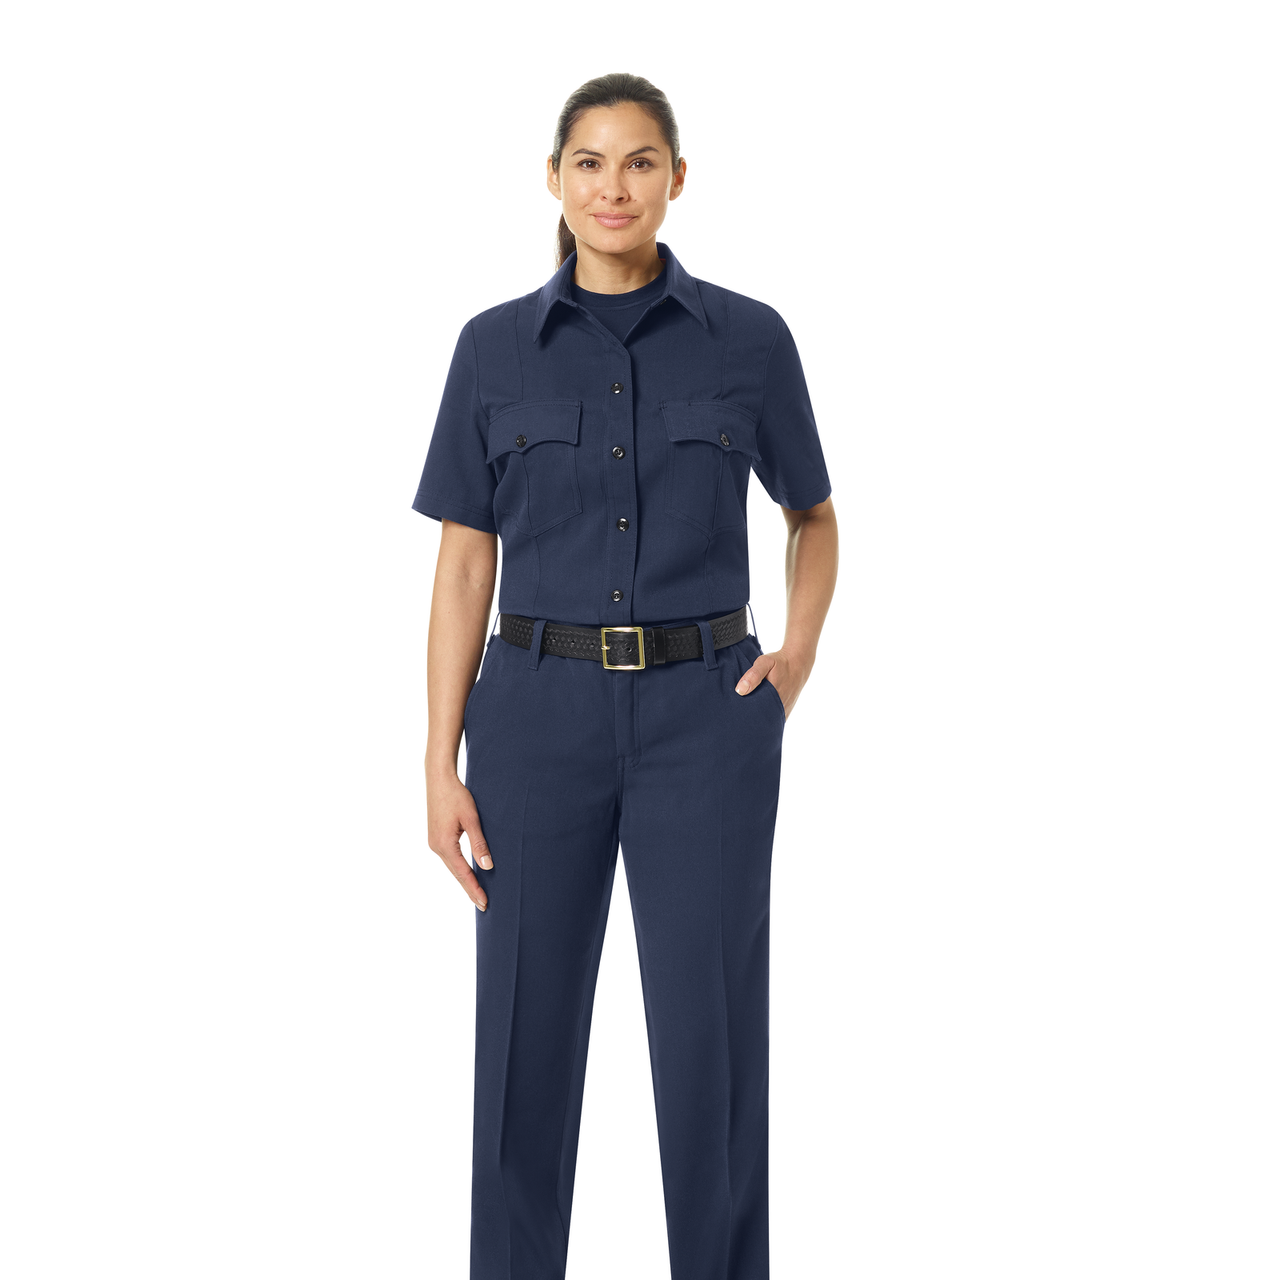 Workrite WomenS Station No. 73 Cargo Pant (FP45) | The Fire Center | Fuego Fire Center | Store | FIREFIGHTER GEAR | FREE SHIPPING | Introducing our new Station No. 73 Collection. Contemporary flame-resistant station wear built with functionality, comfort and NFPA® 1975 compliance in mind. Contoured waistband helps you move naturally without causing discomfort or drooping.